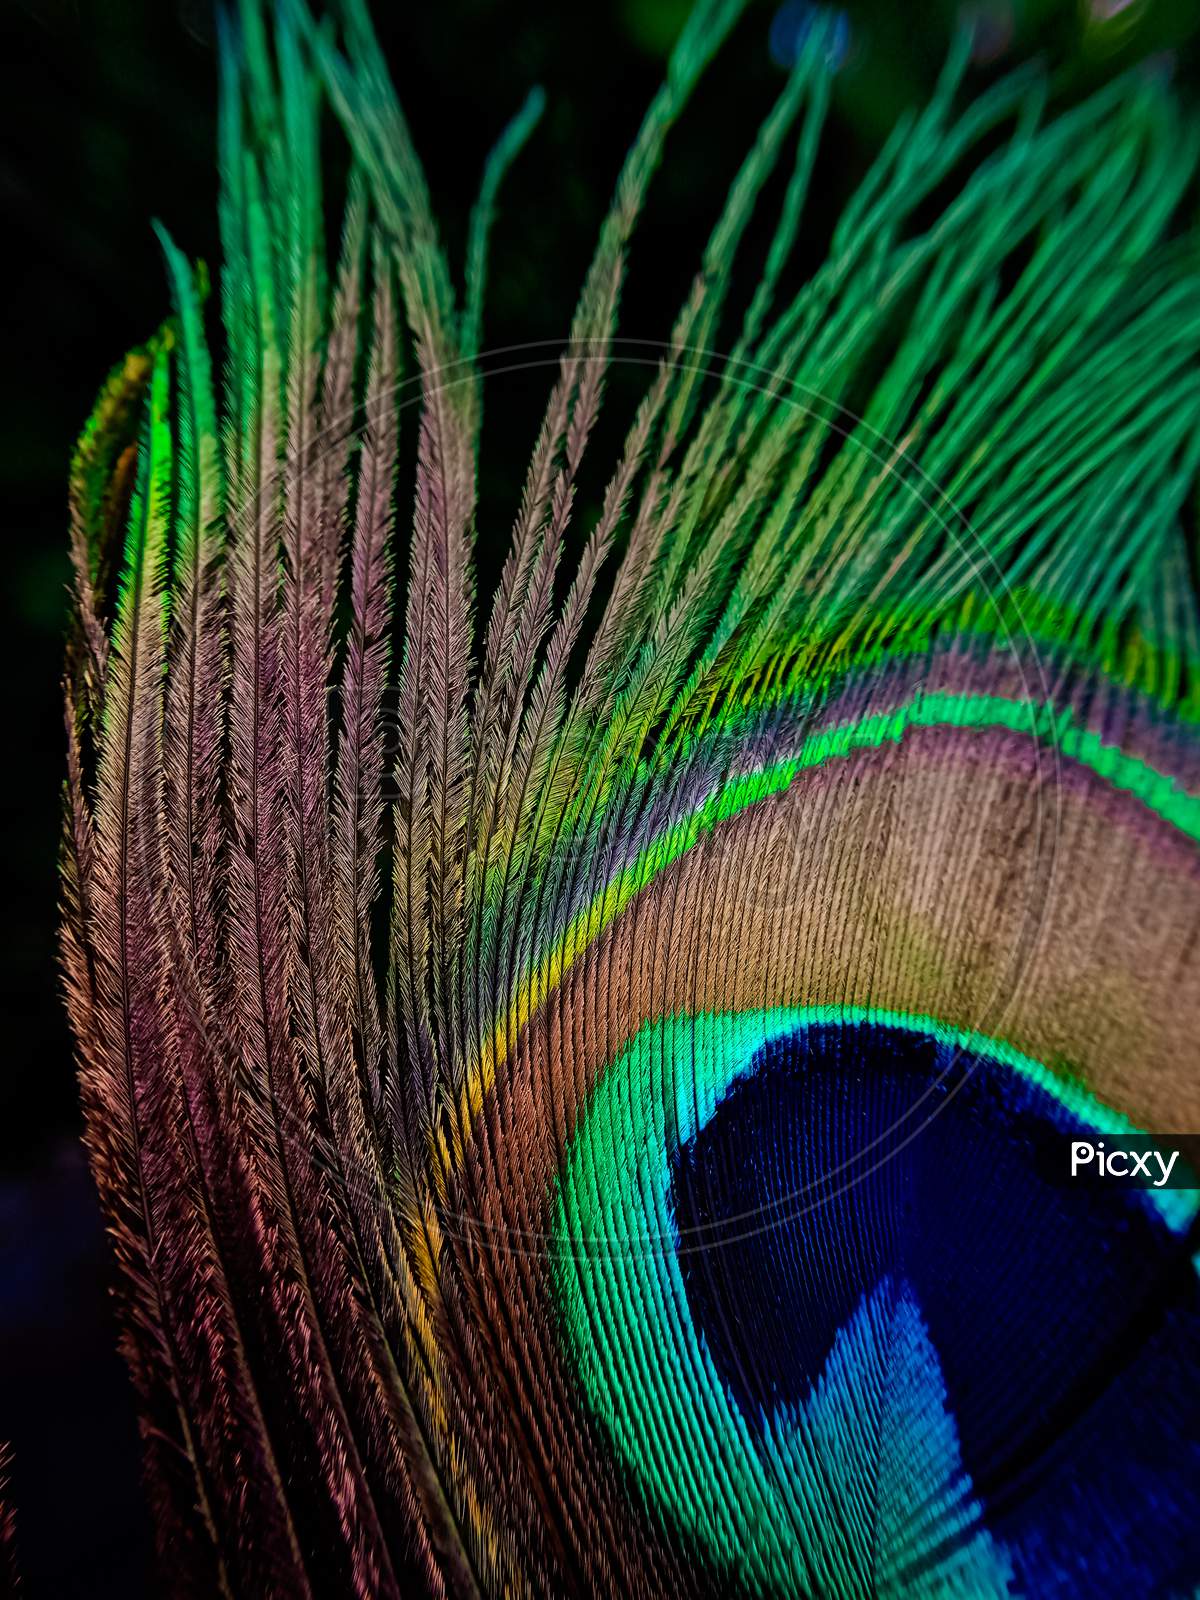 Texture of a peacock's feather